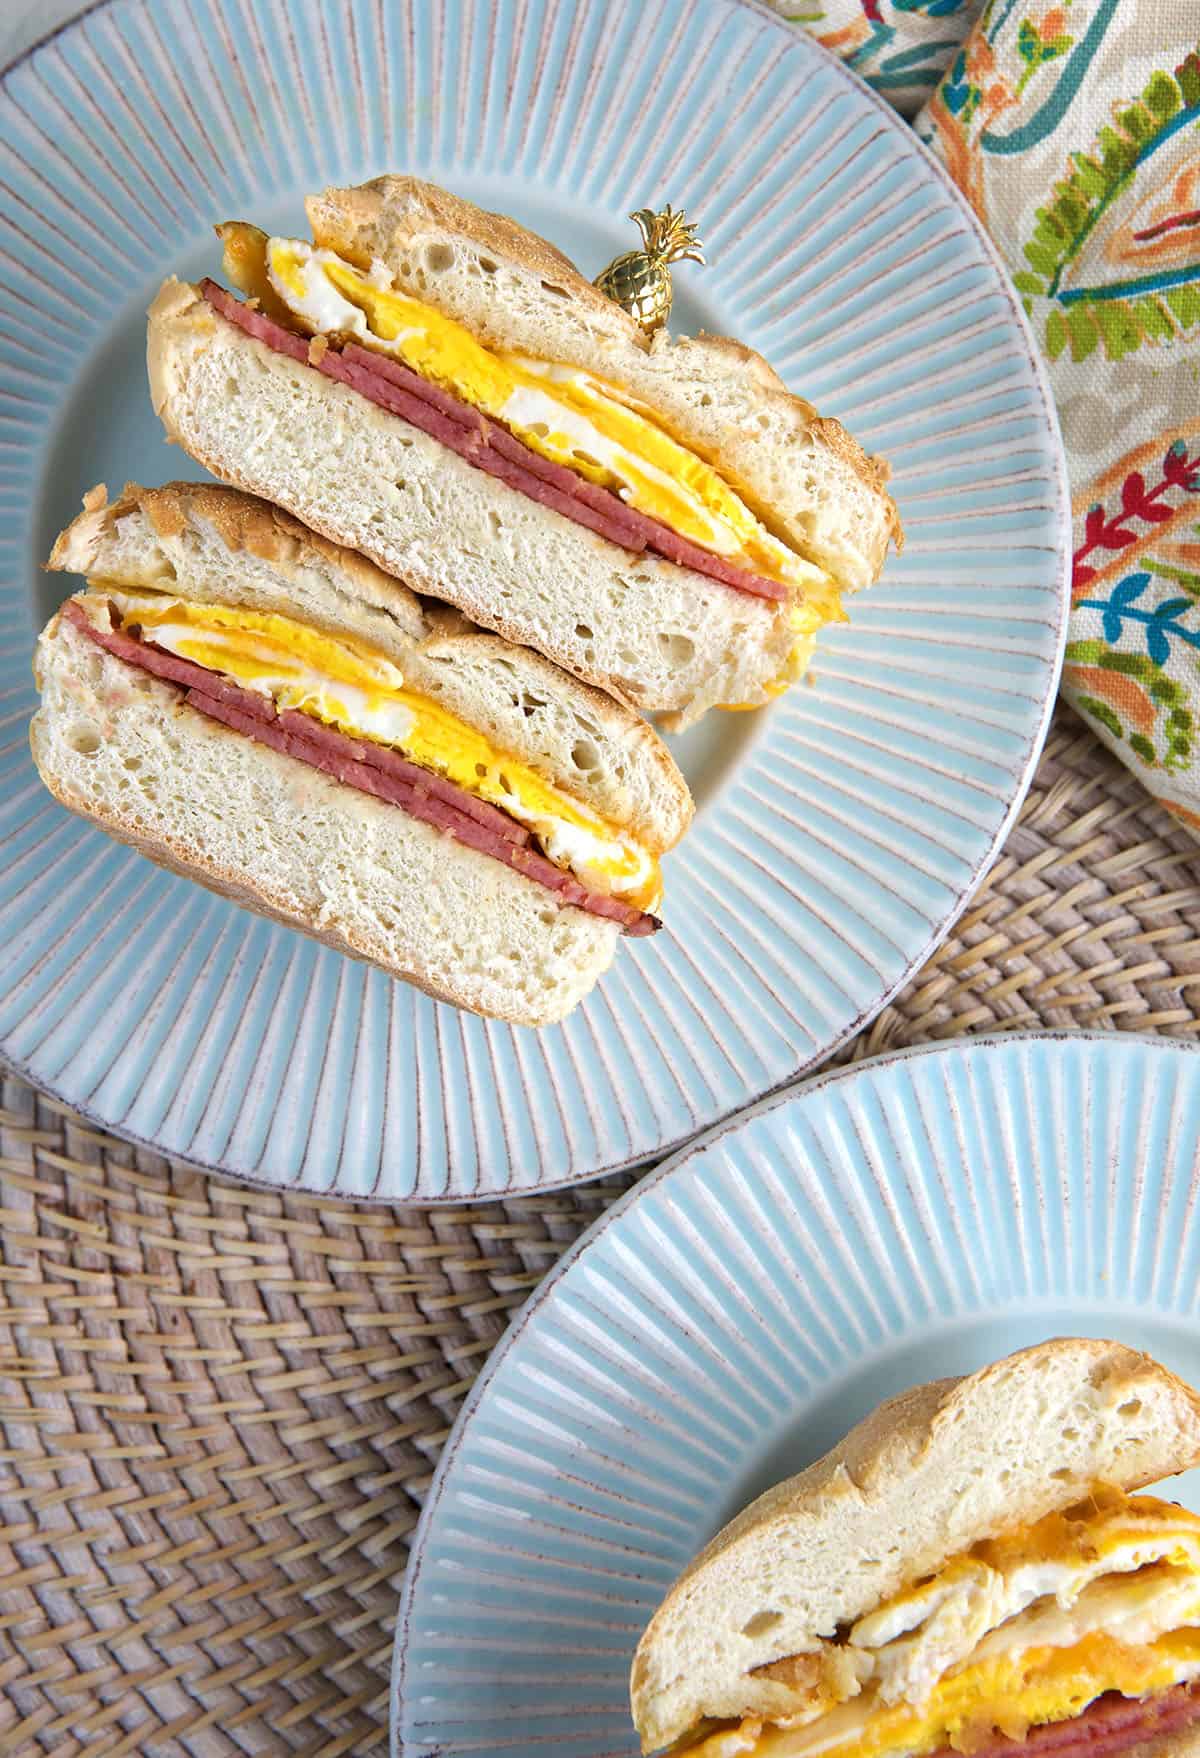 Two halved sandwiches are placed on round plates.